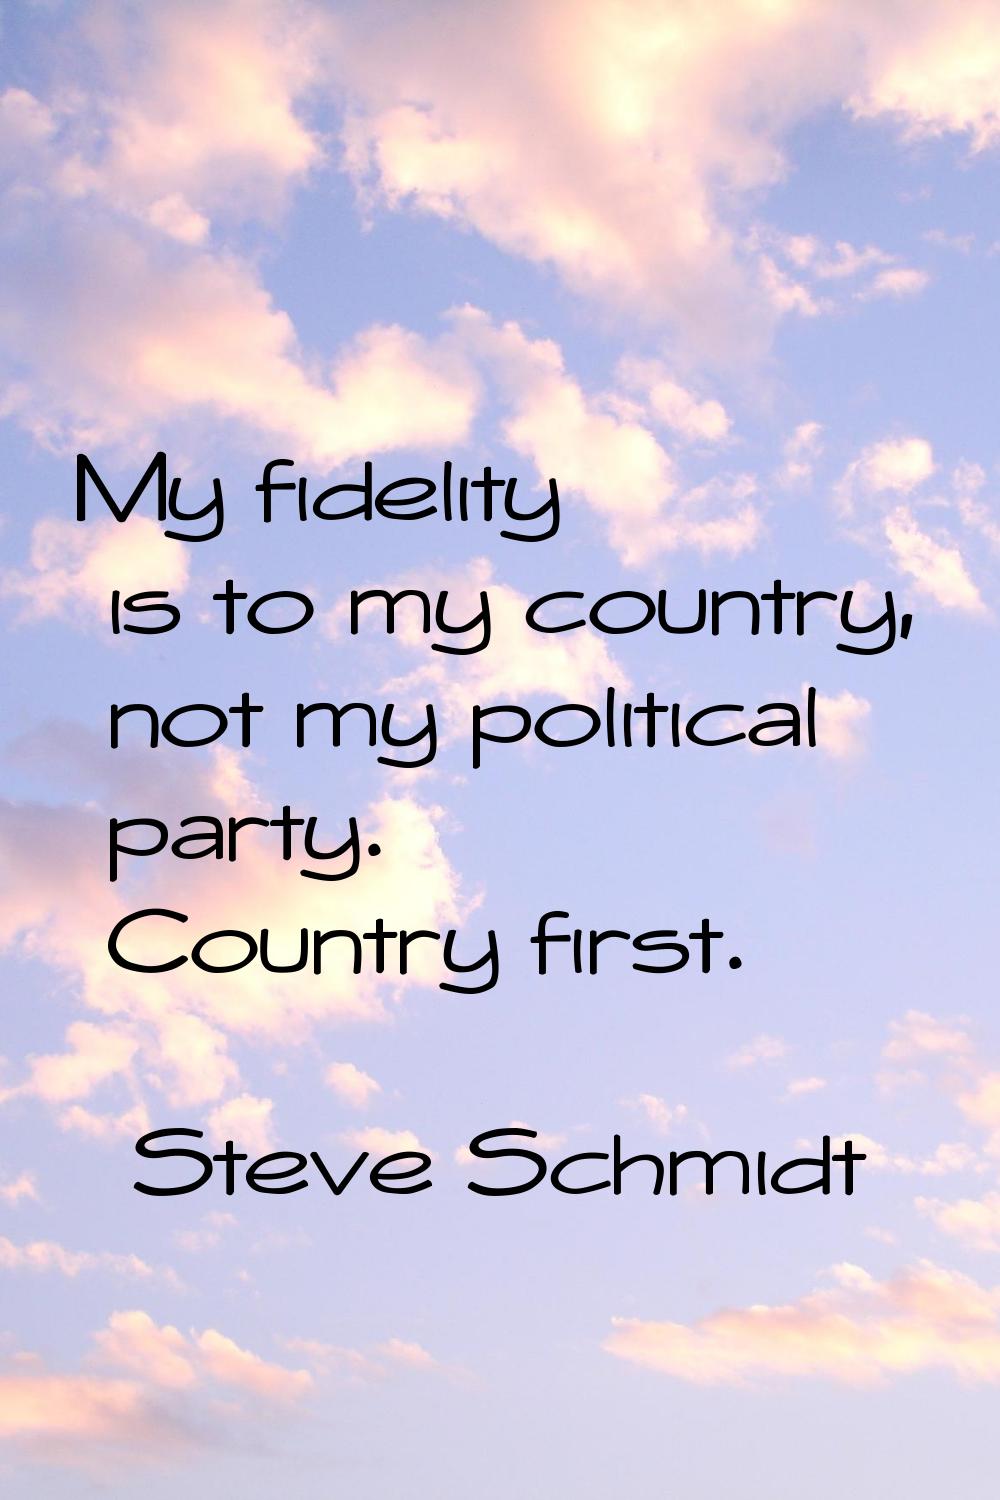 My fidelity is to my country, not my political party. Country first.